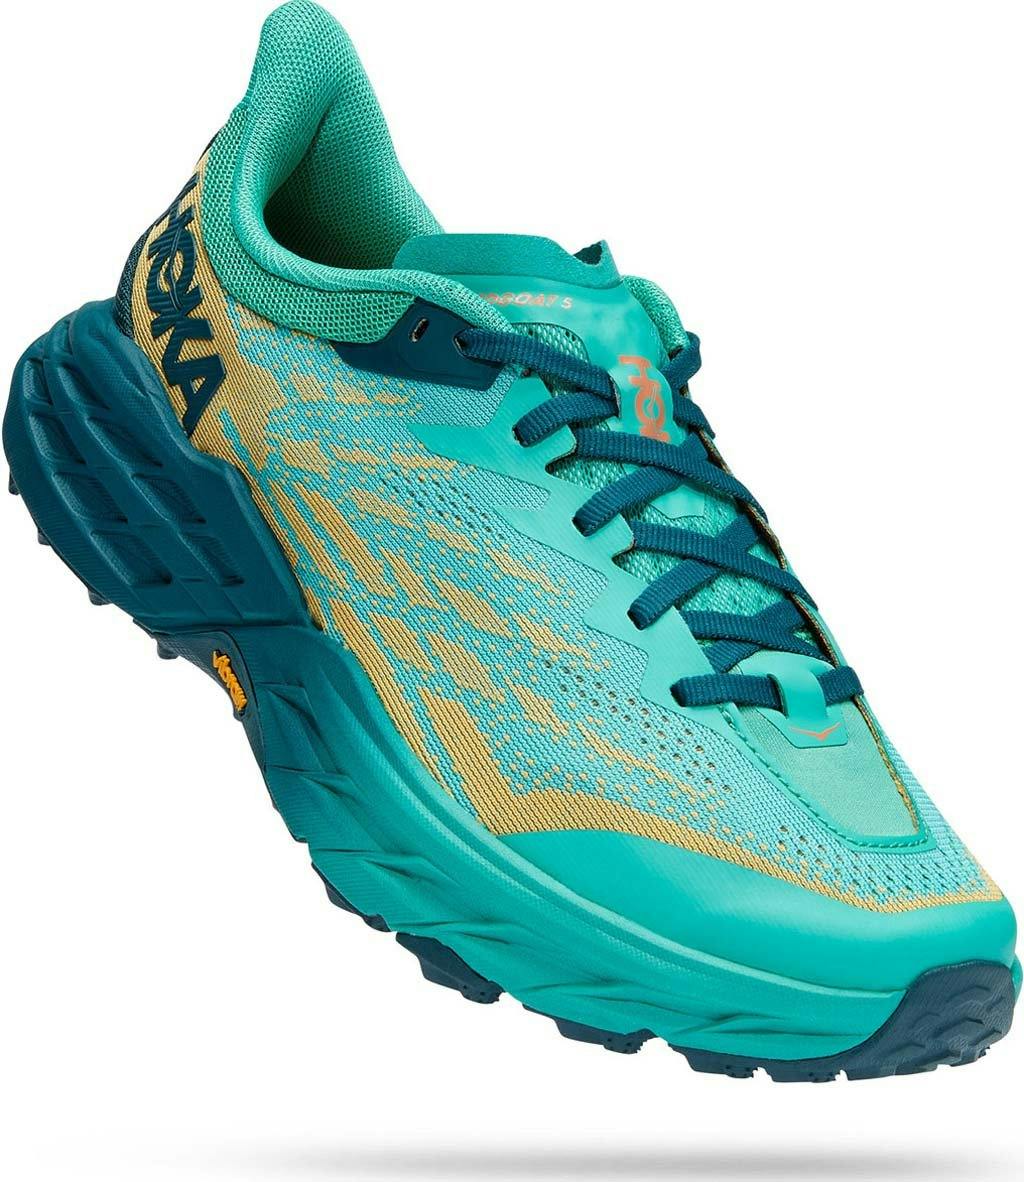 Product image for Speedgoat 5 Trail Running Shoes - Women's